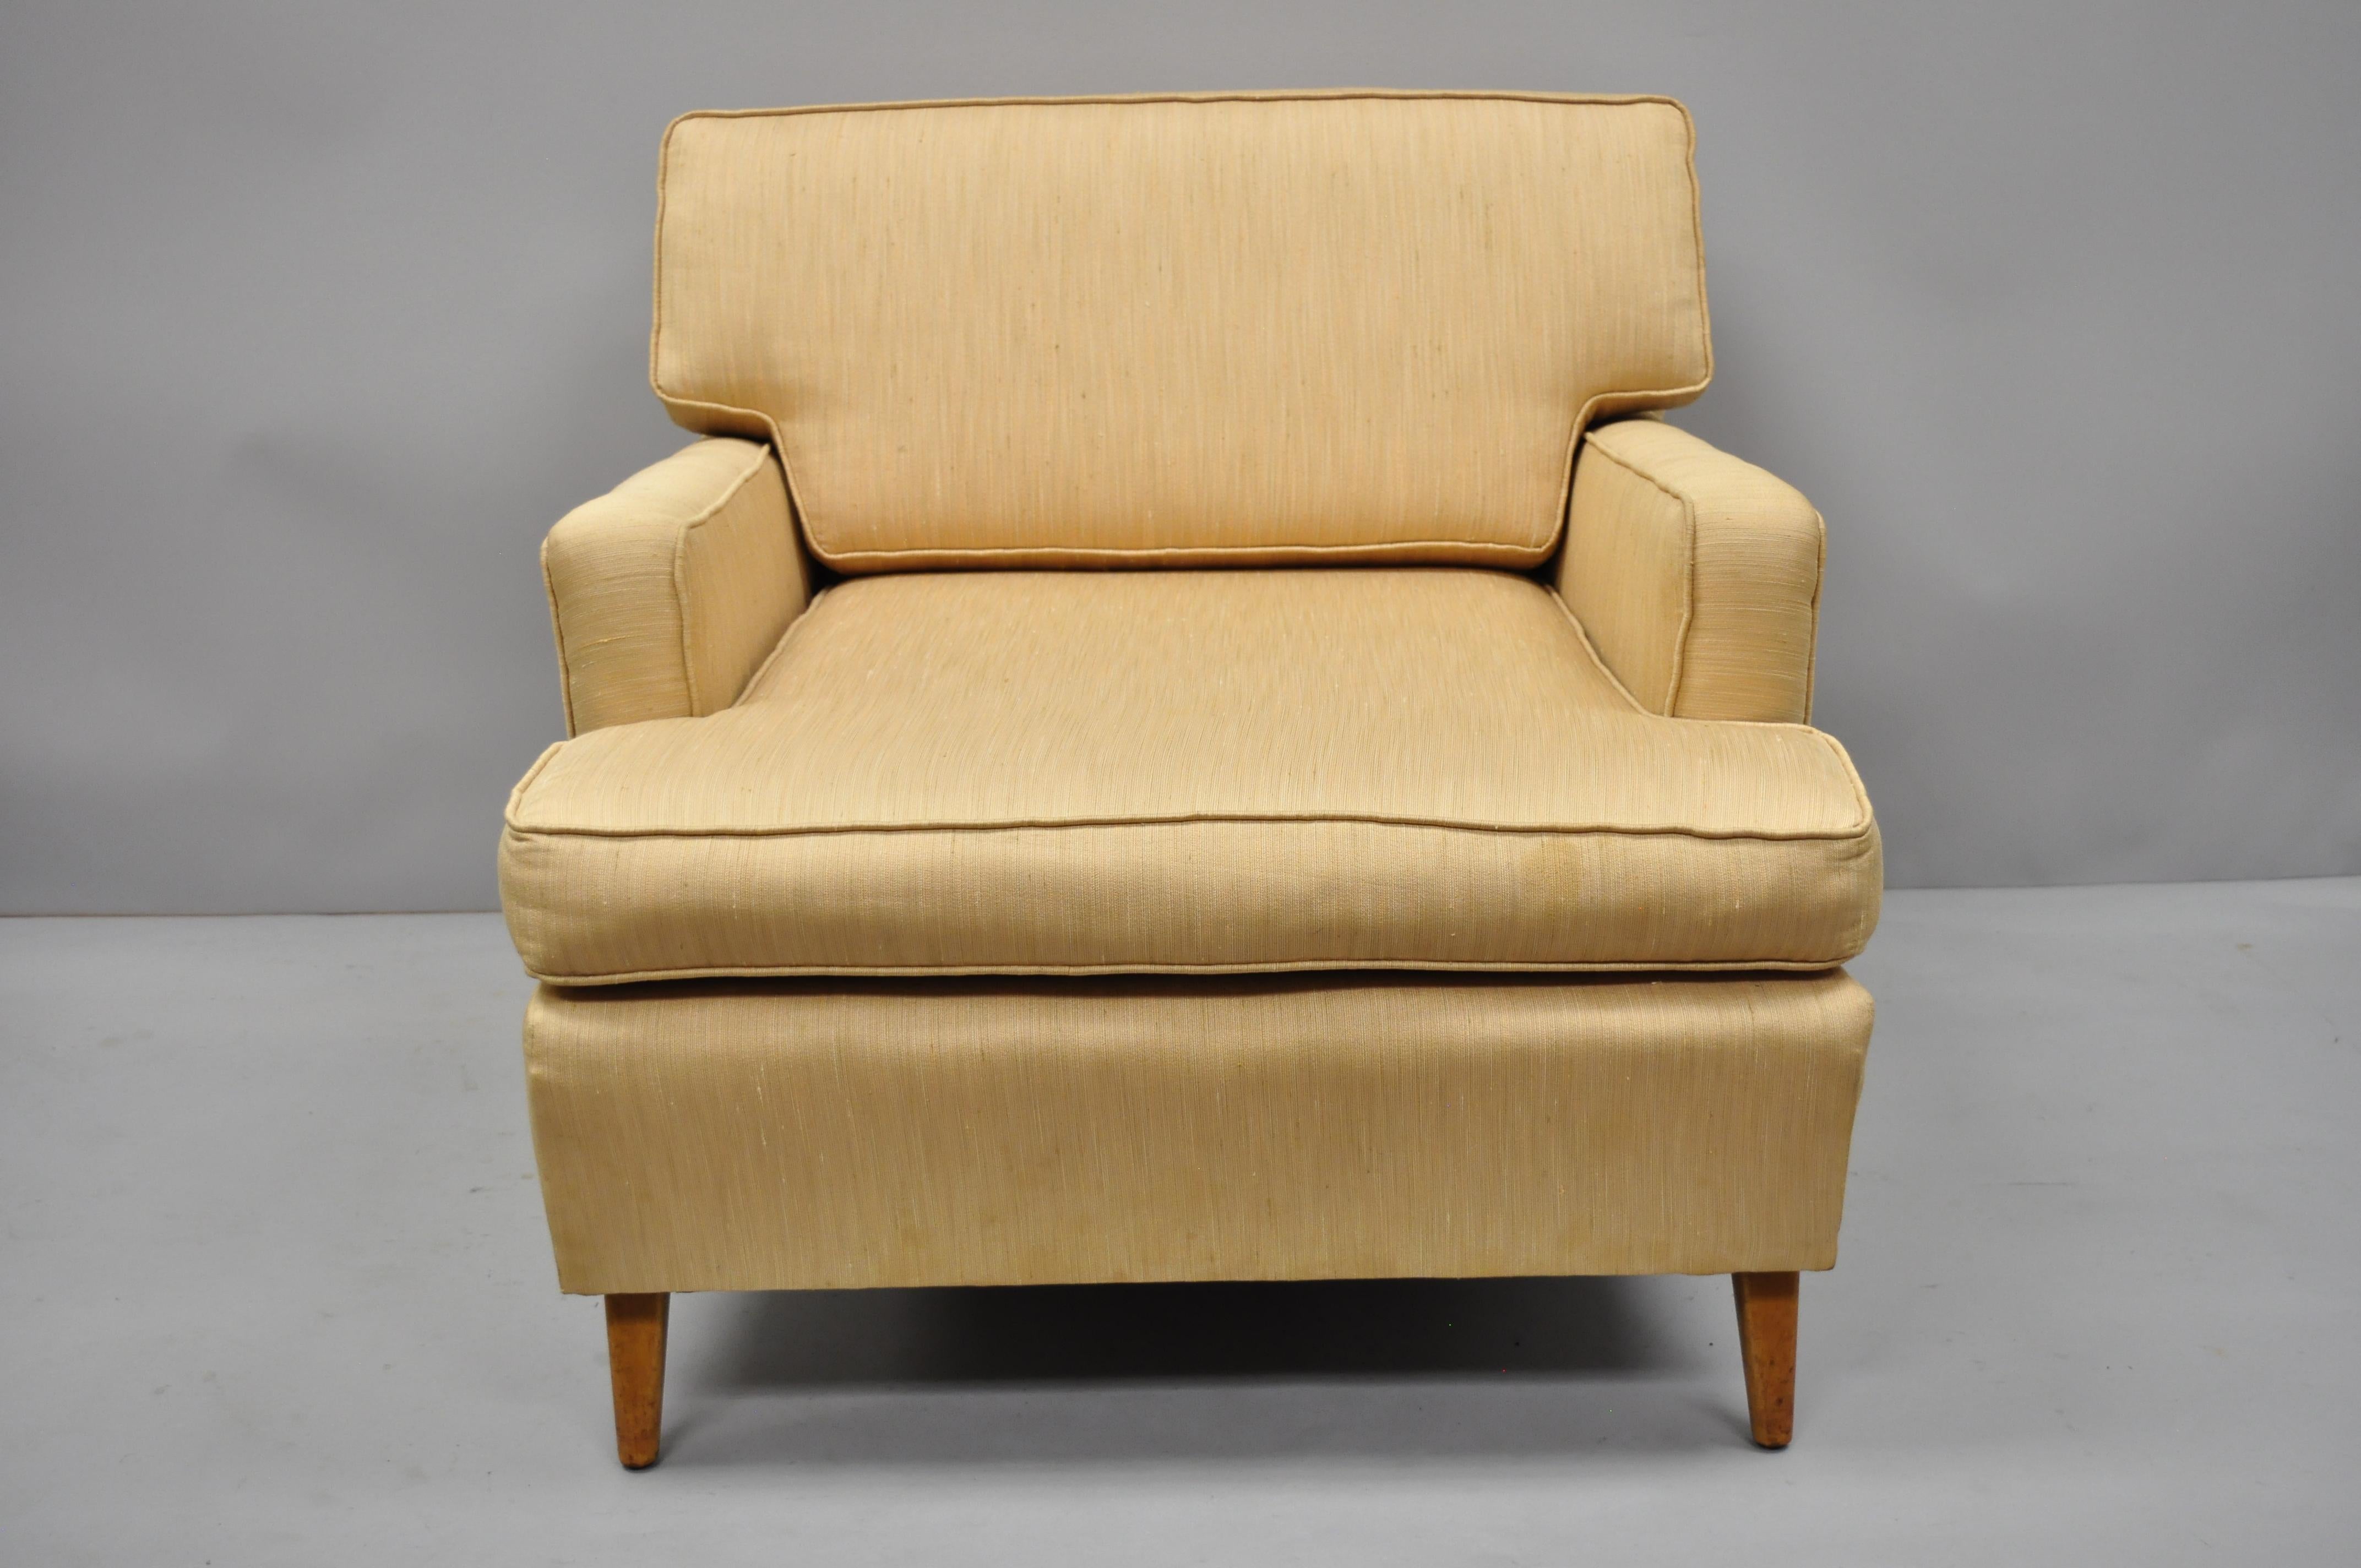 Mid-Century Modern upholstered club lounge chair after Paul McCobb and Harvey Probber. Item features angled and tapered legs, nice comfortable form, solid wood frame, tapered legs, clean modernist lines, and sleek sculptural form. Possibly by Paul